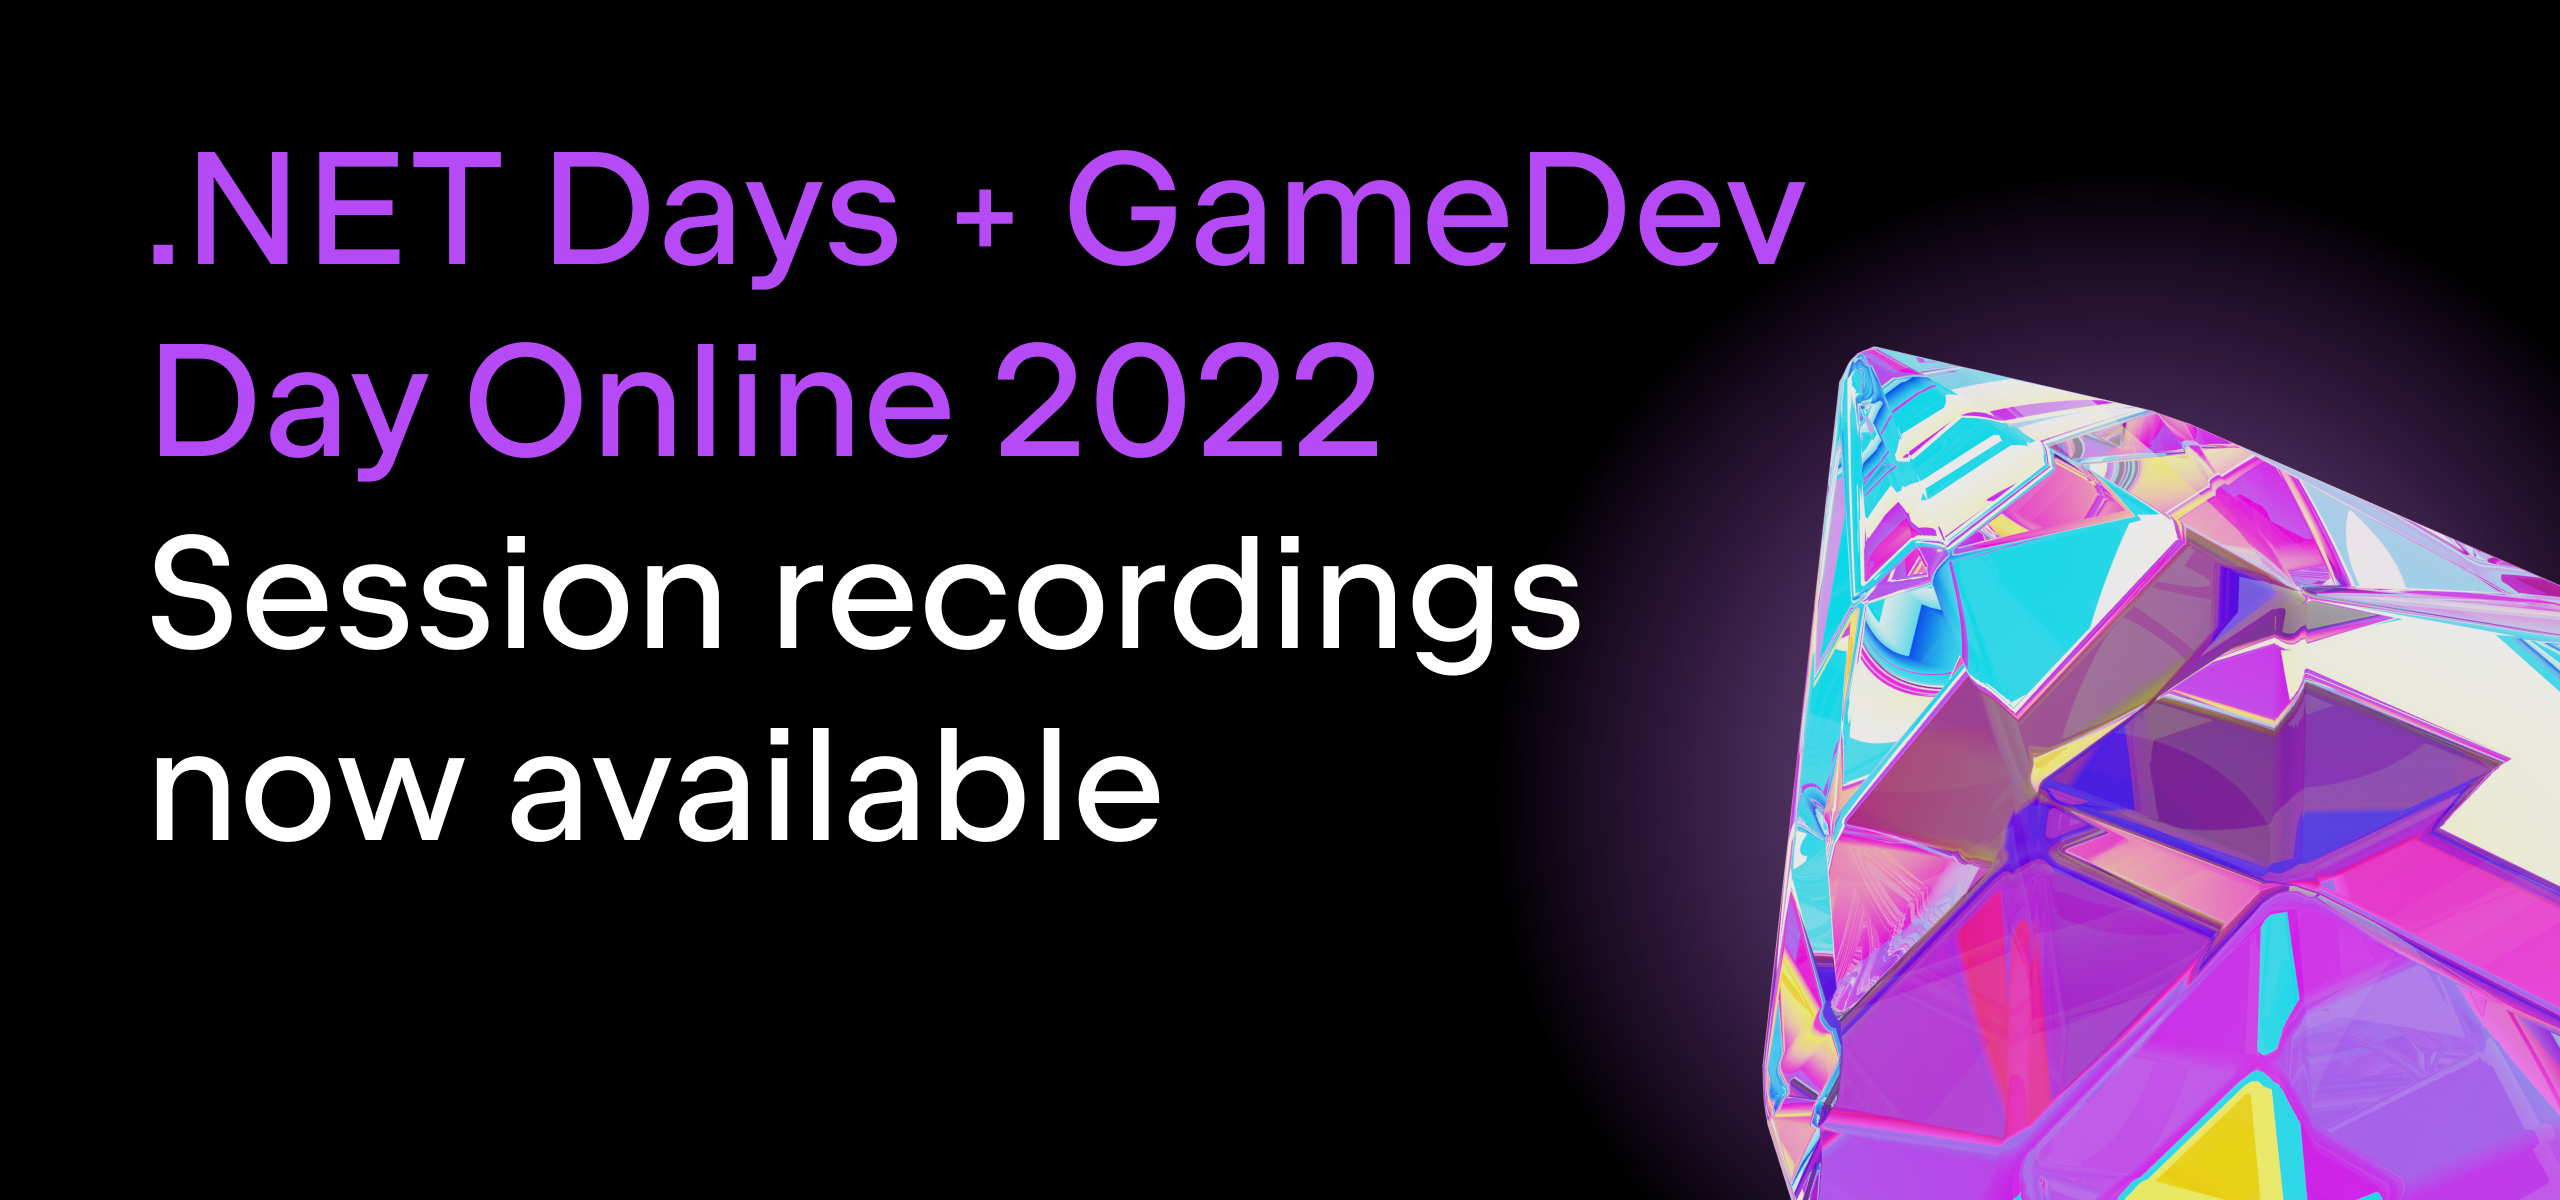 Session recordings for .NET Days + GameDev Day Online 2022